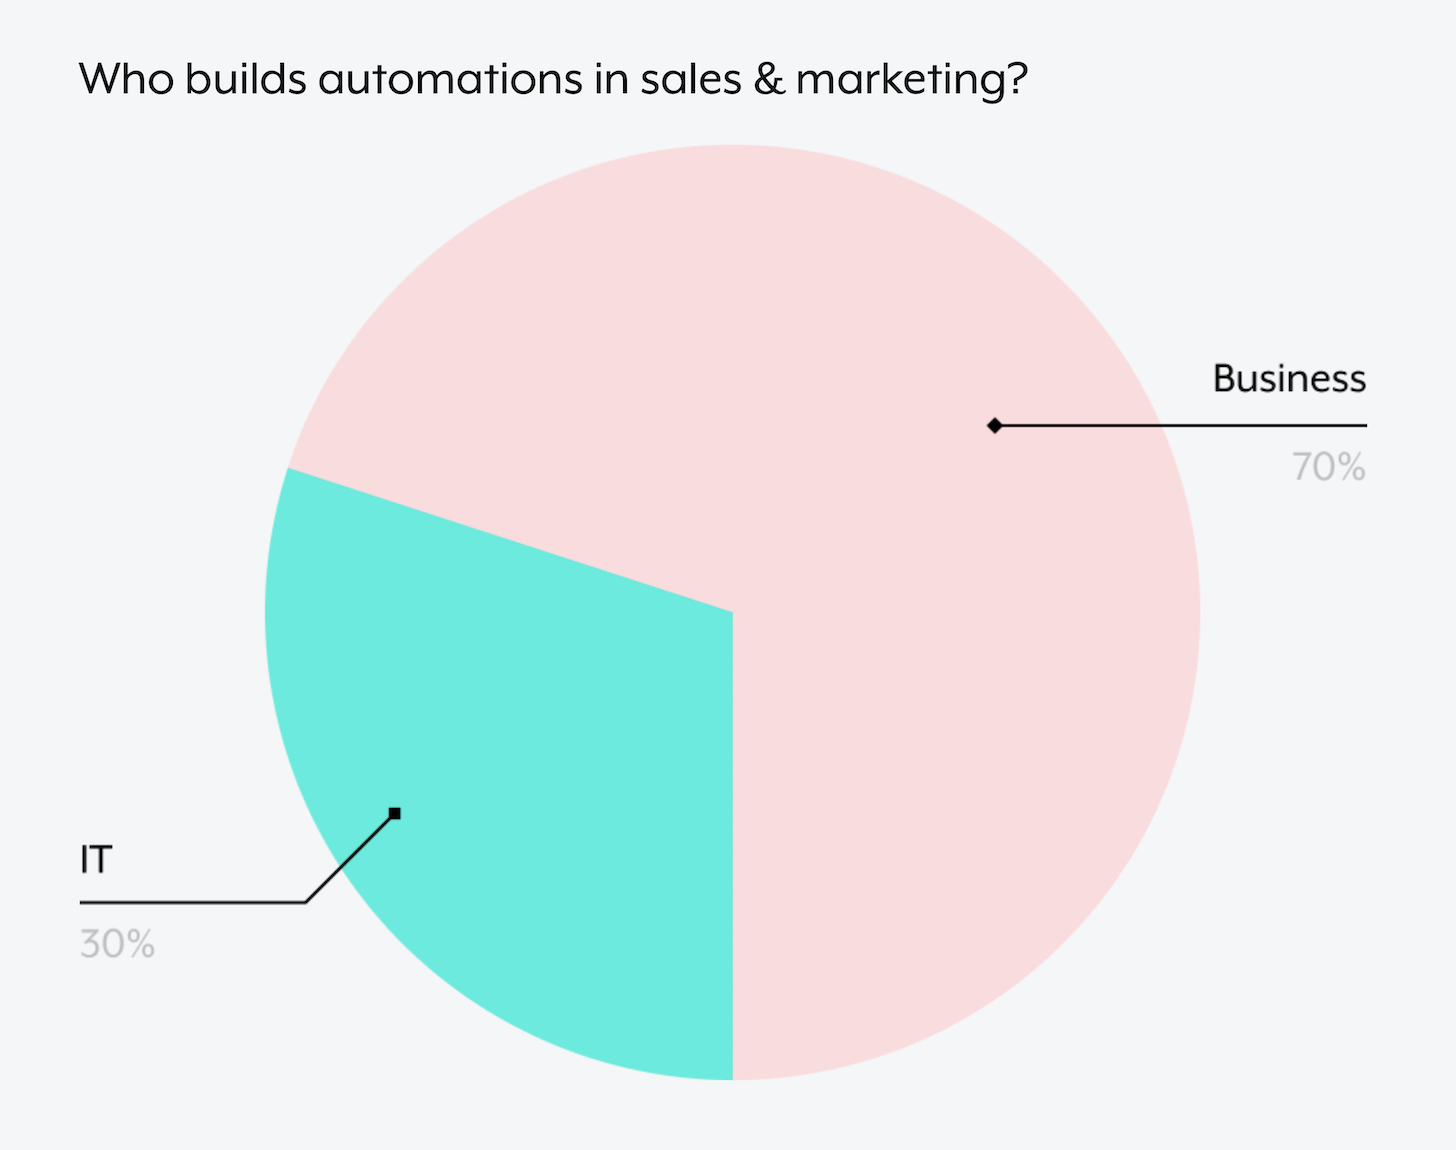 More Automations in Marketing Built by Business Users instead of IT